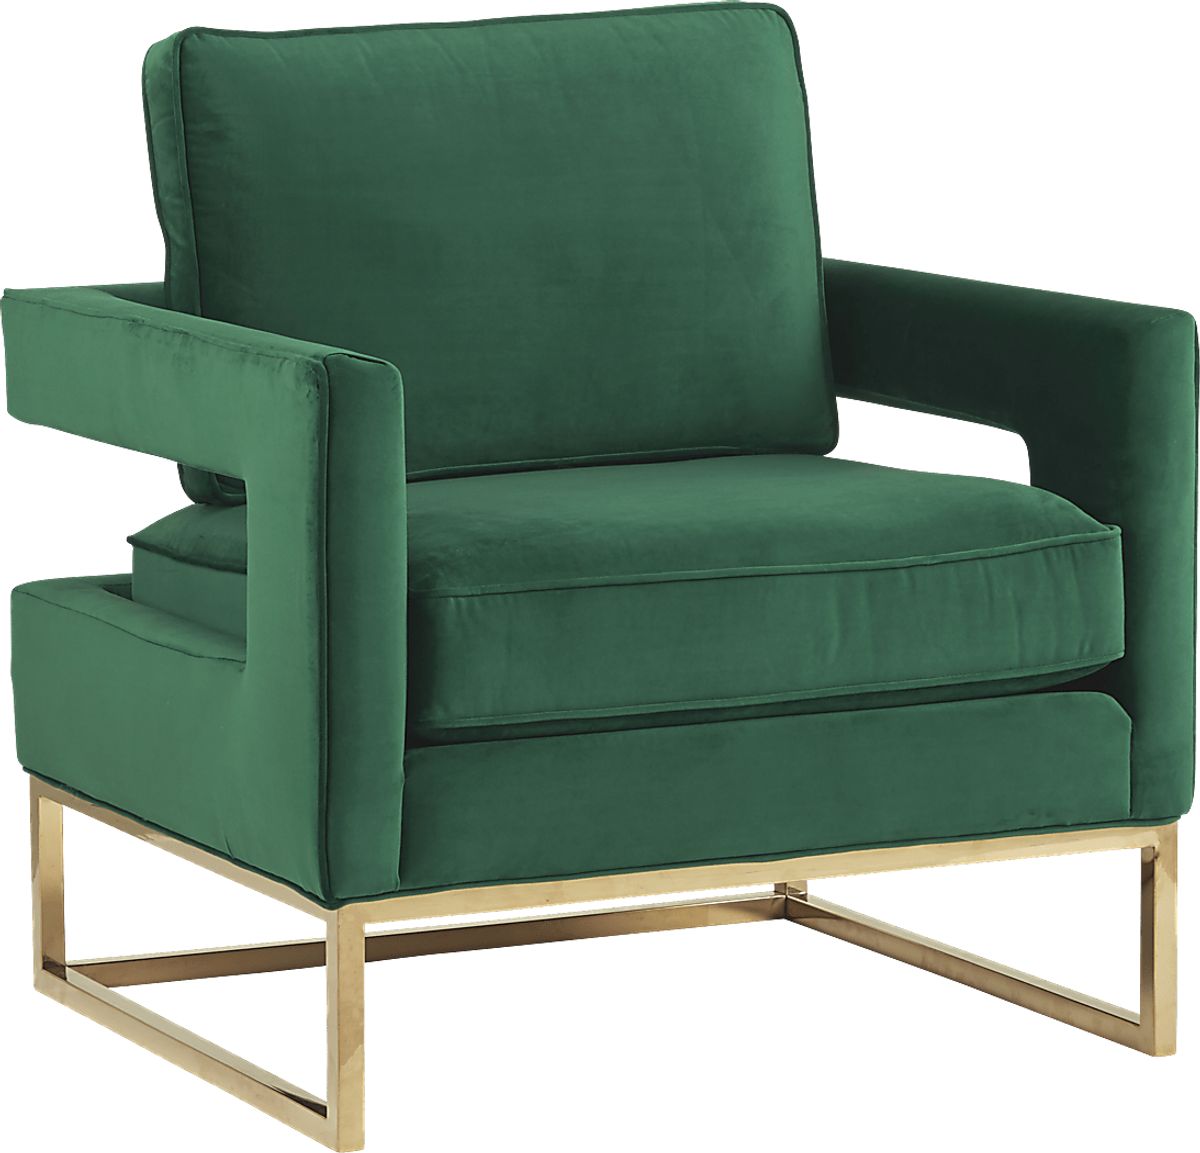 Avery Forest Green Polyester Fabric Accent Chair | Rooms to Go